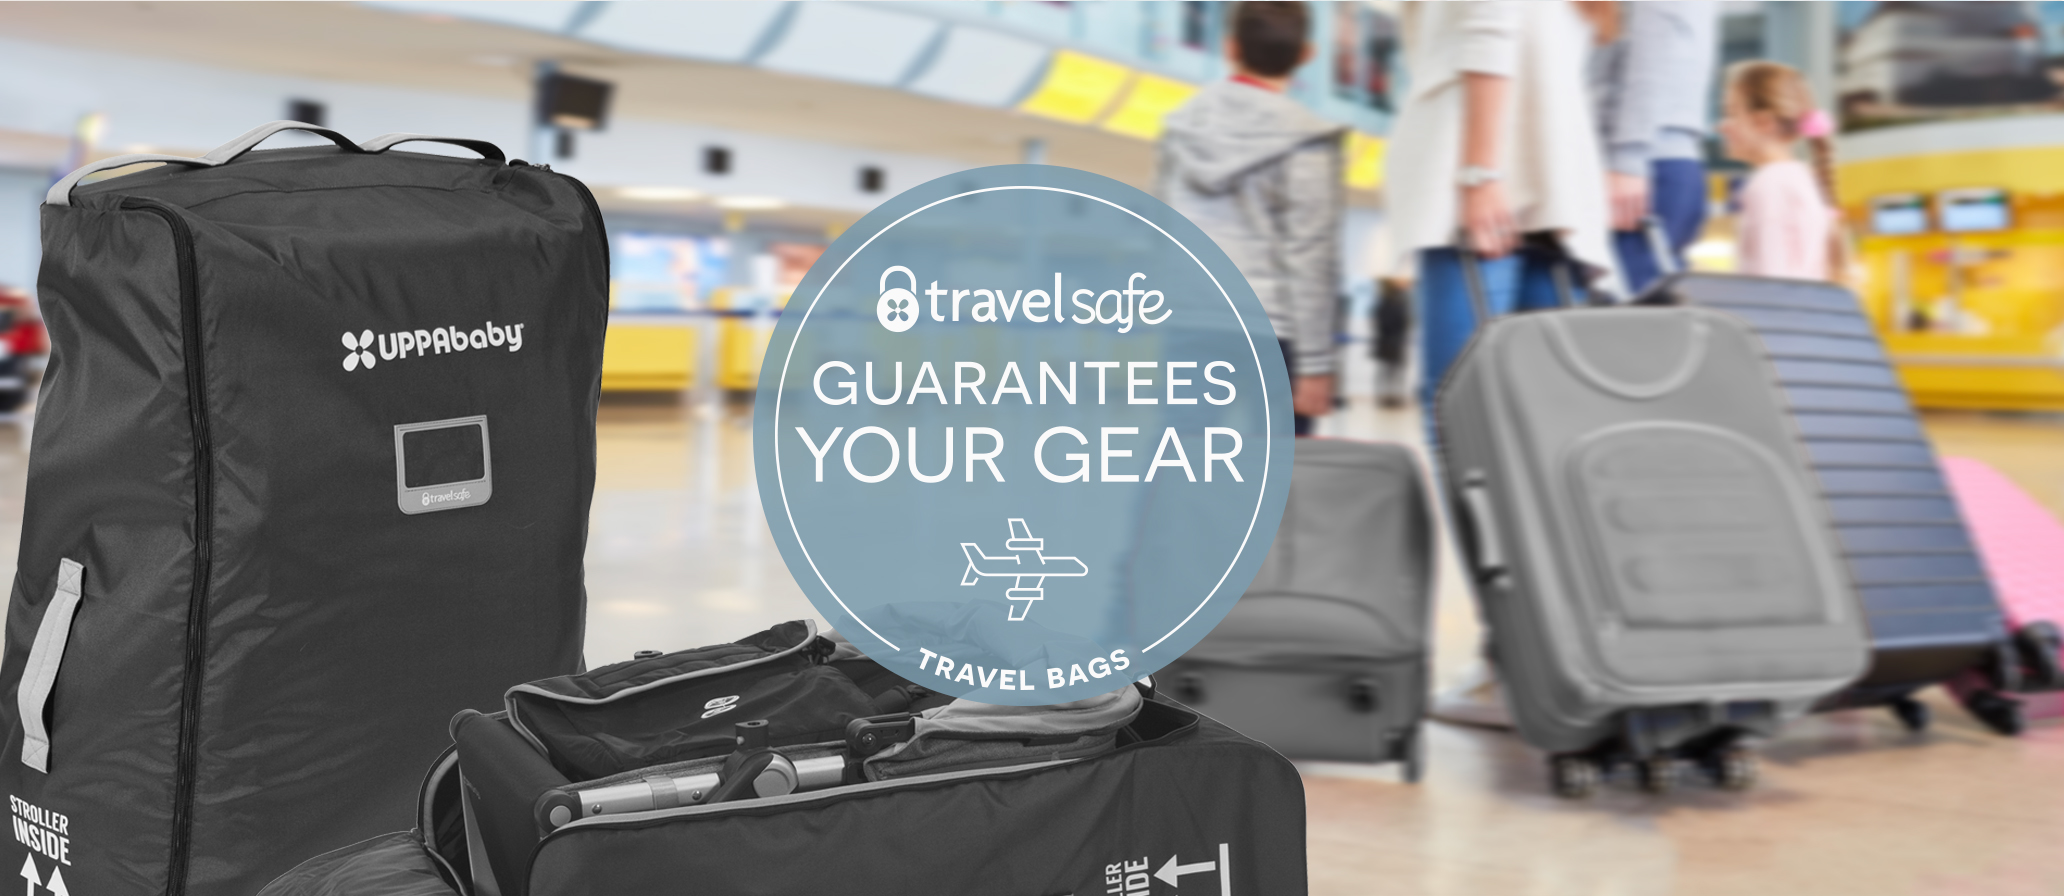 Travel more, worry less | UPPAbaby - AU